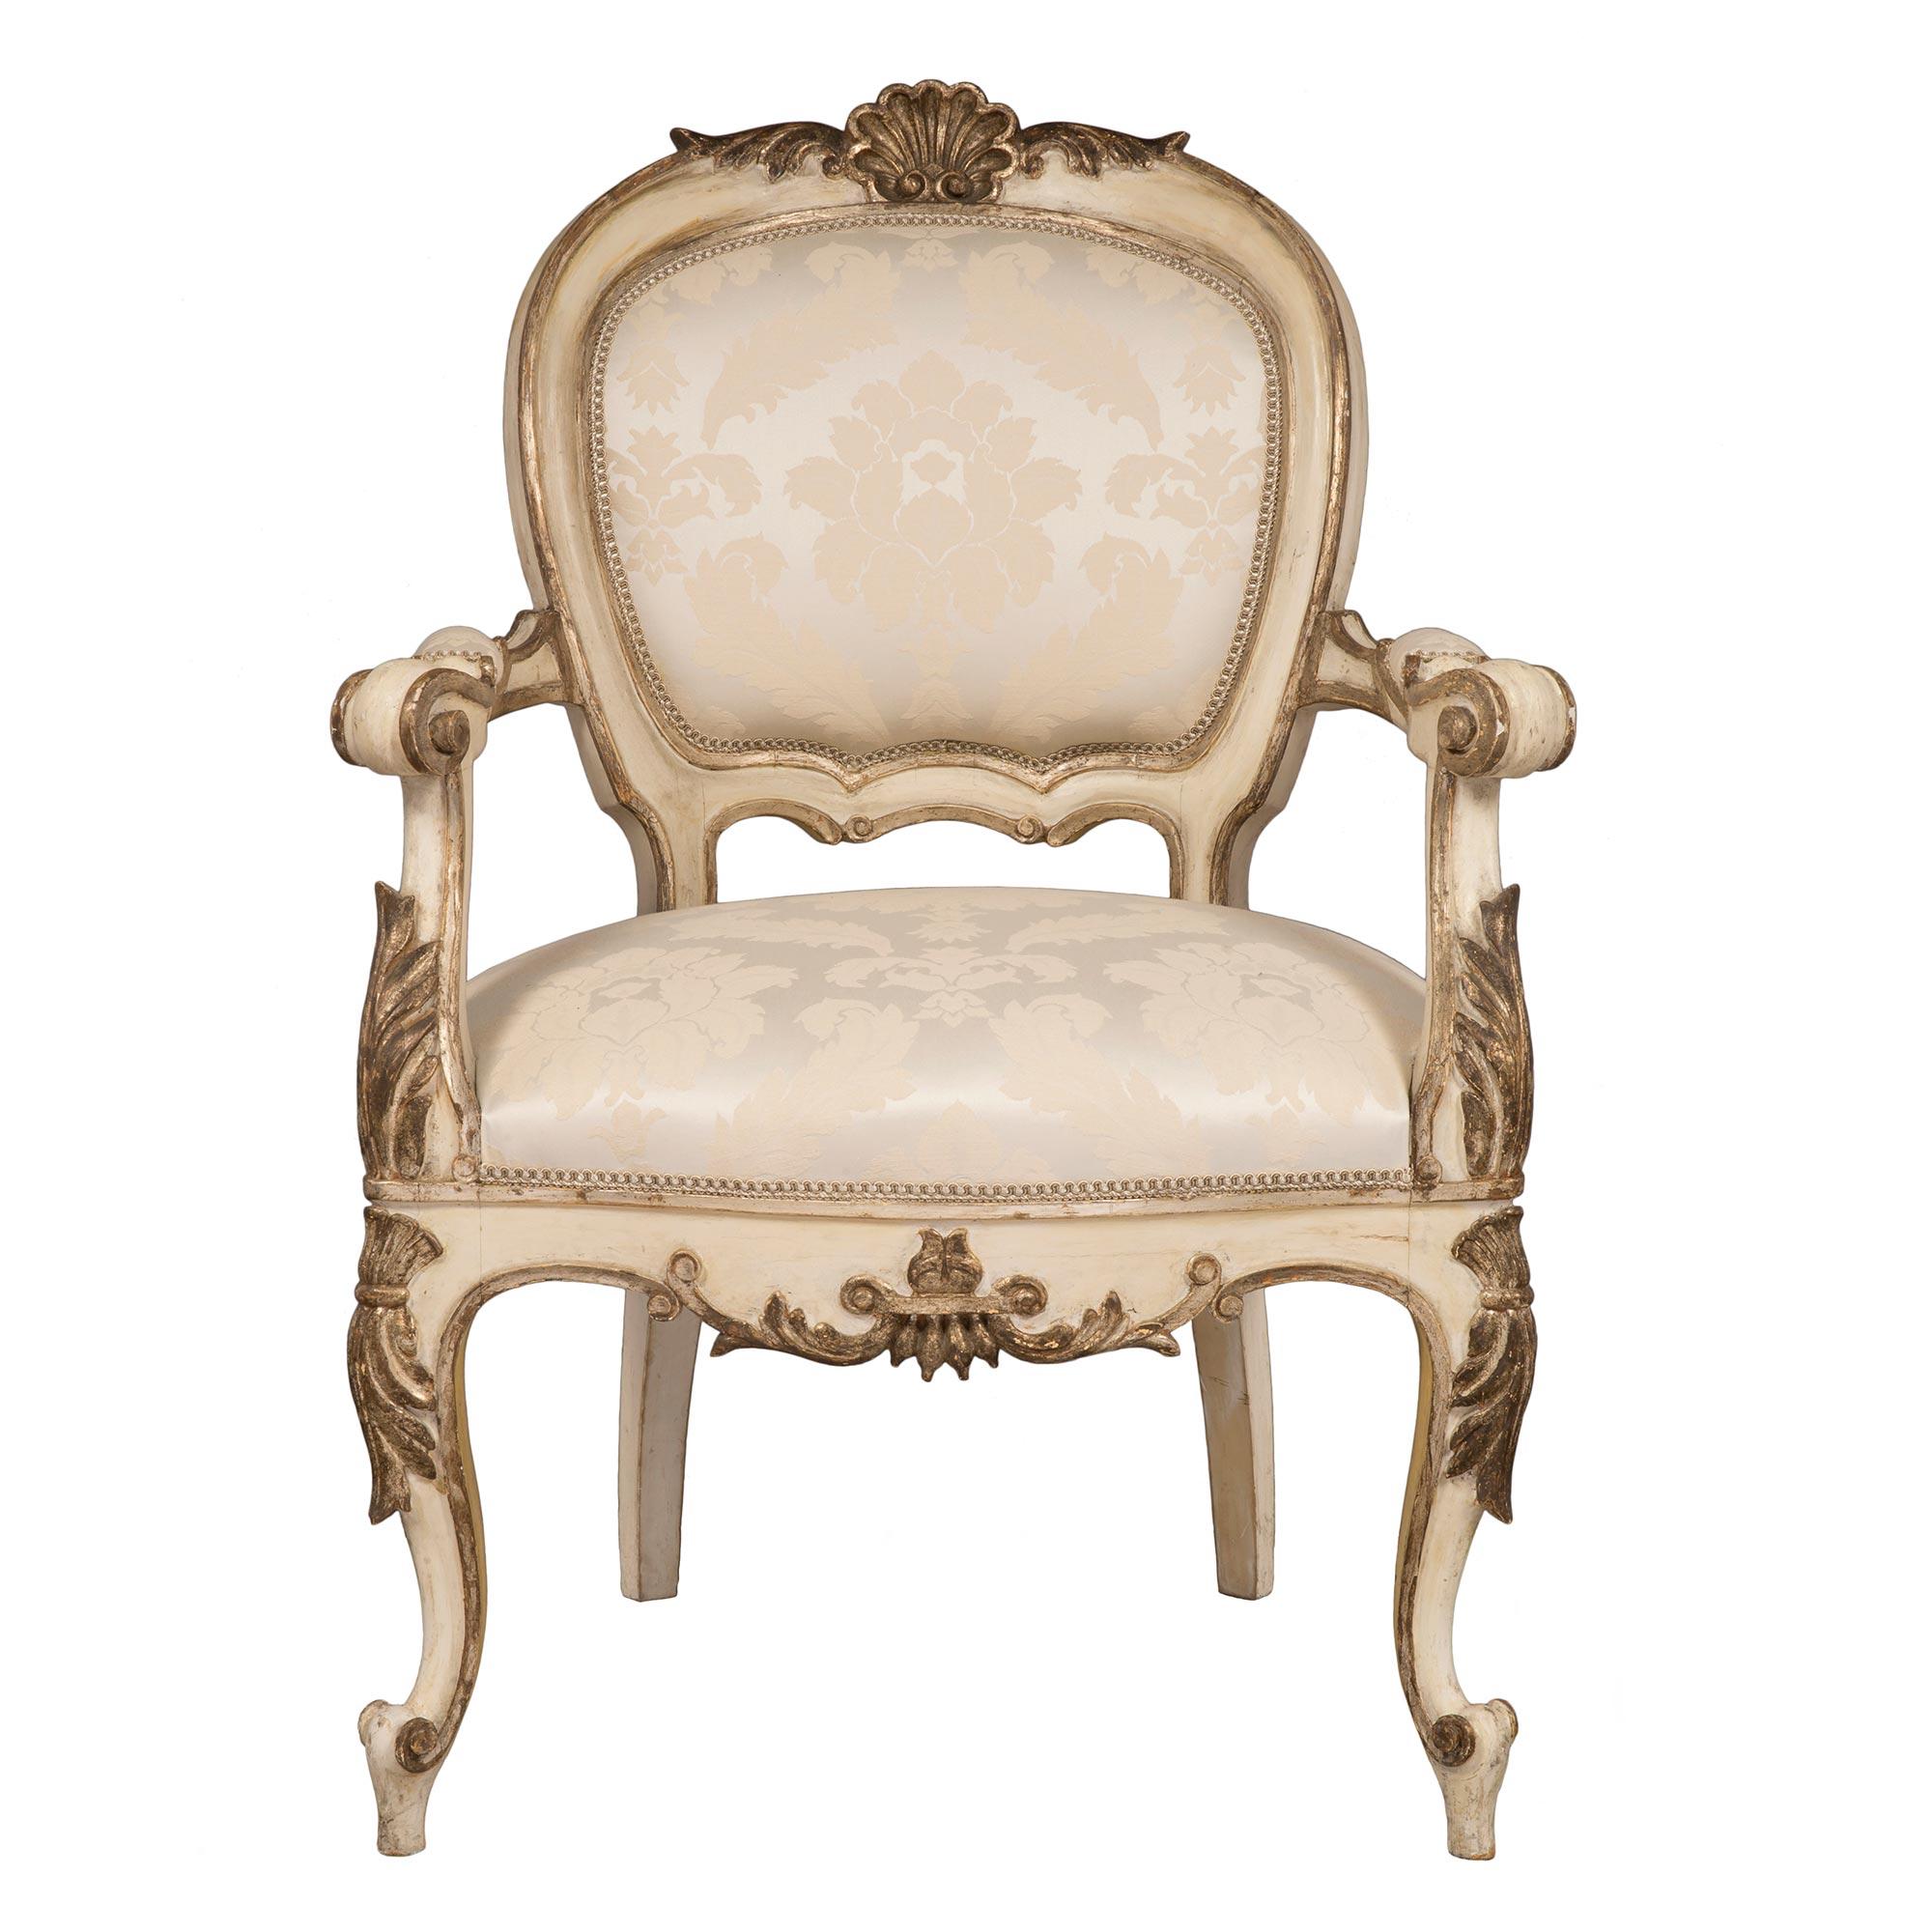 A very attractive set of four Italian early 19th century Louis XV st. patinated off white and Mecca armchairs. Each chair is raised by ‘S’ scrolled cabriole legs with large carved Mecca acanthus leaves at the top. The scalloped shaped frieze has a